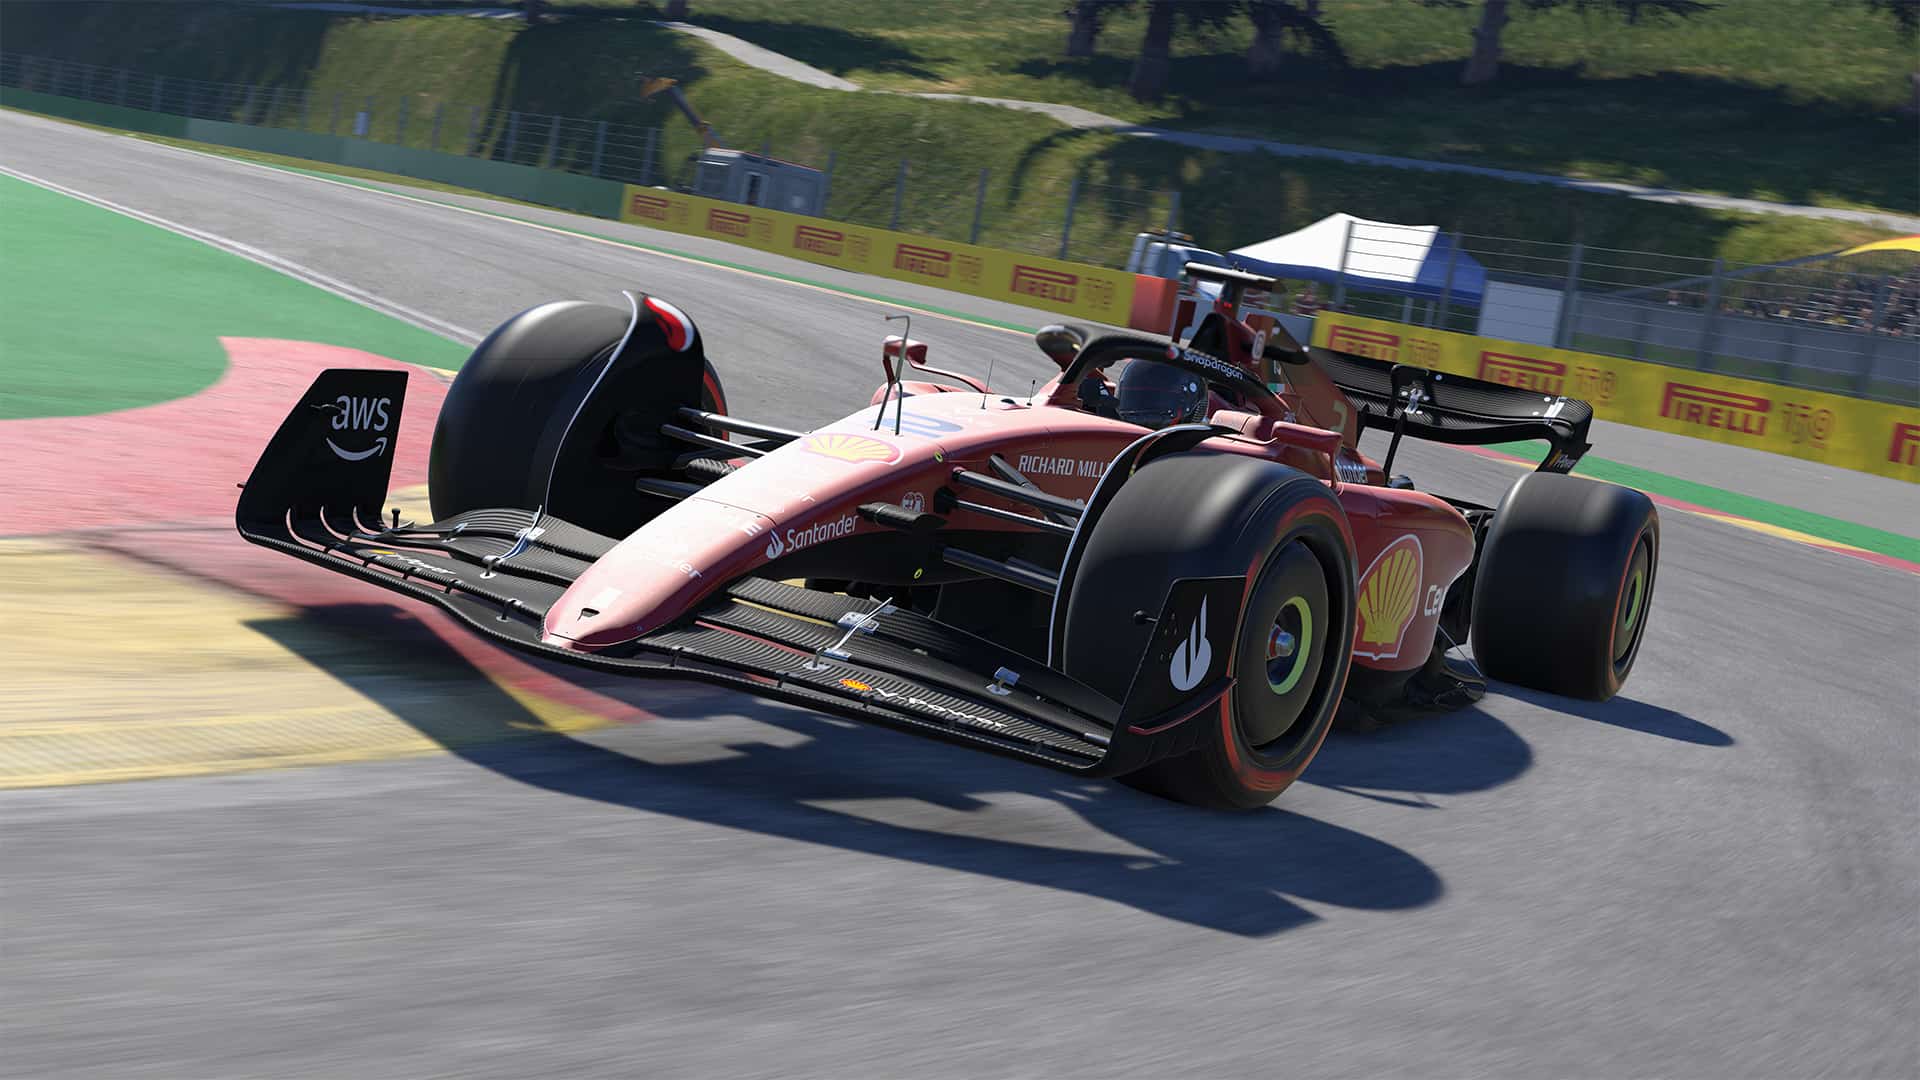 How to use cross-platform multiplayer in F1 22 